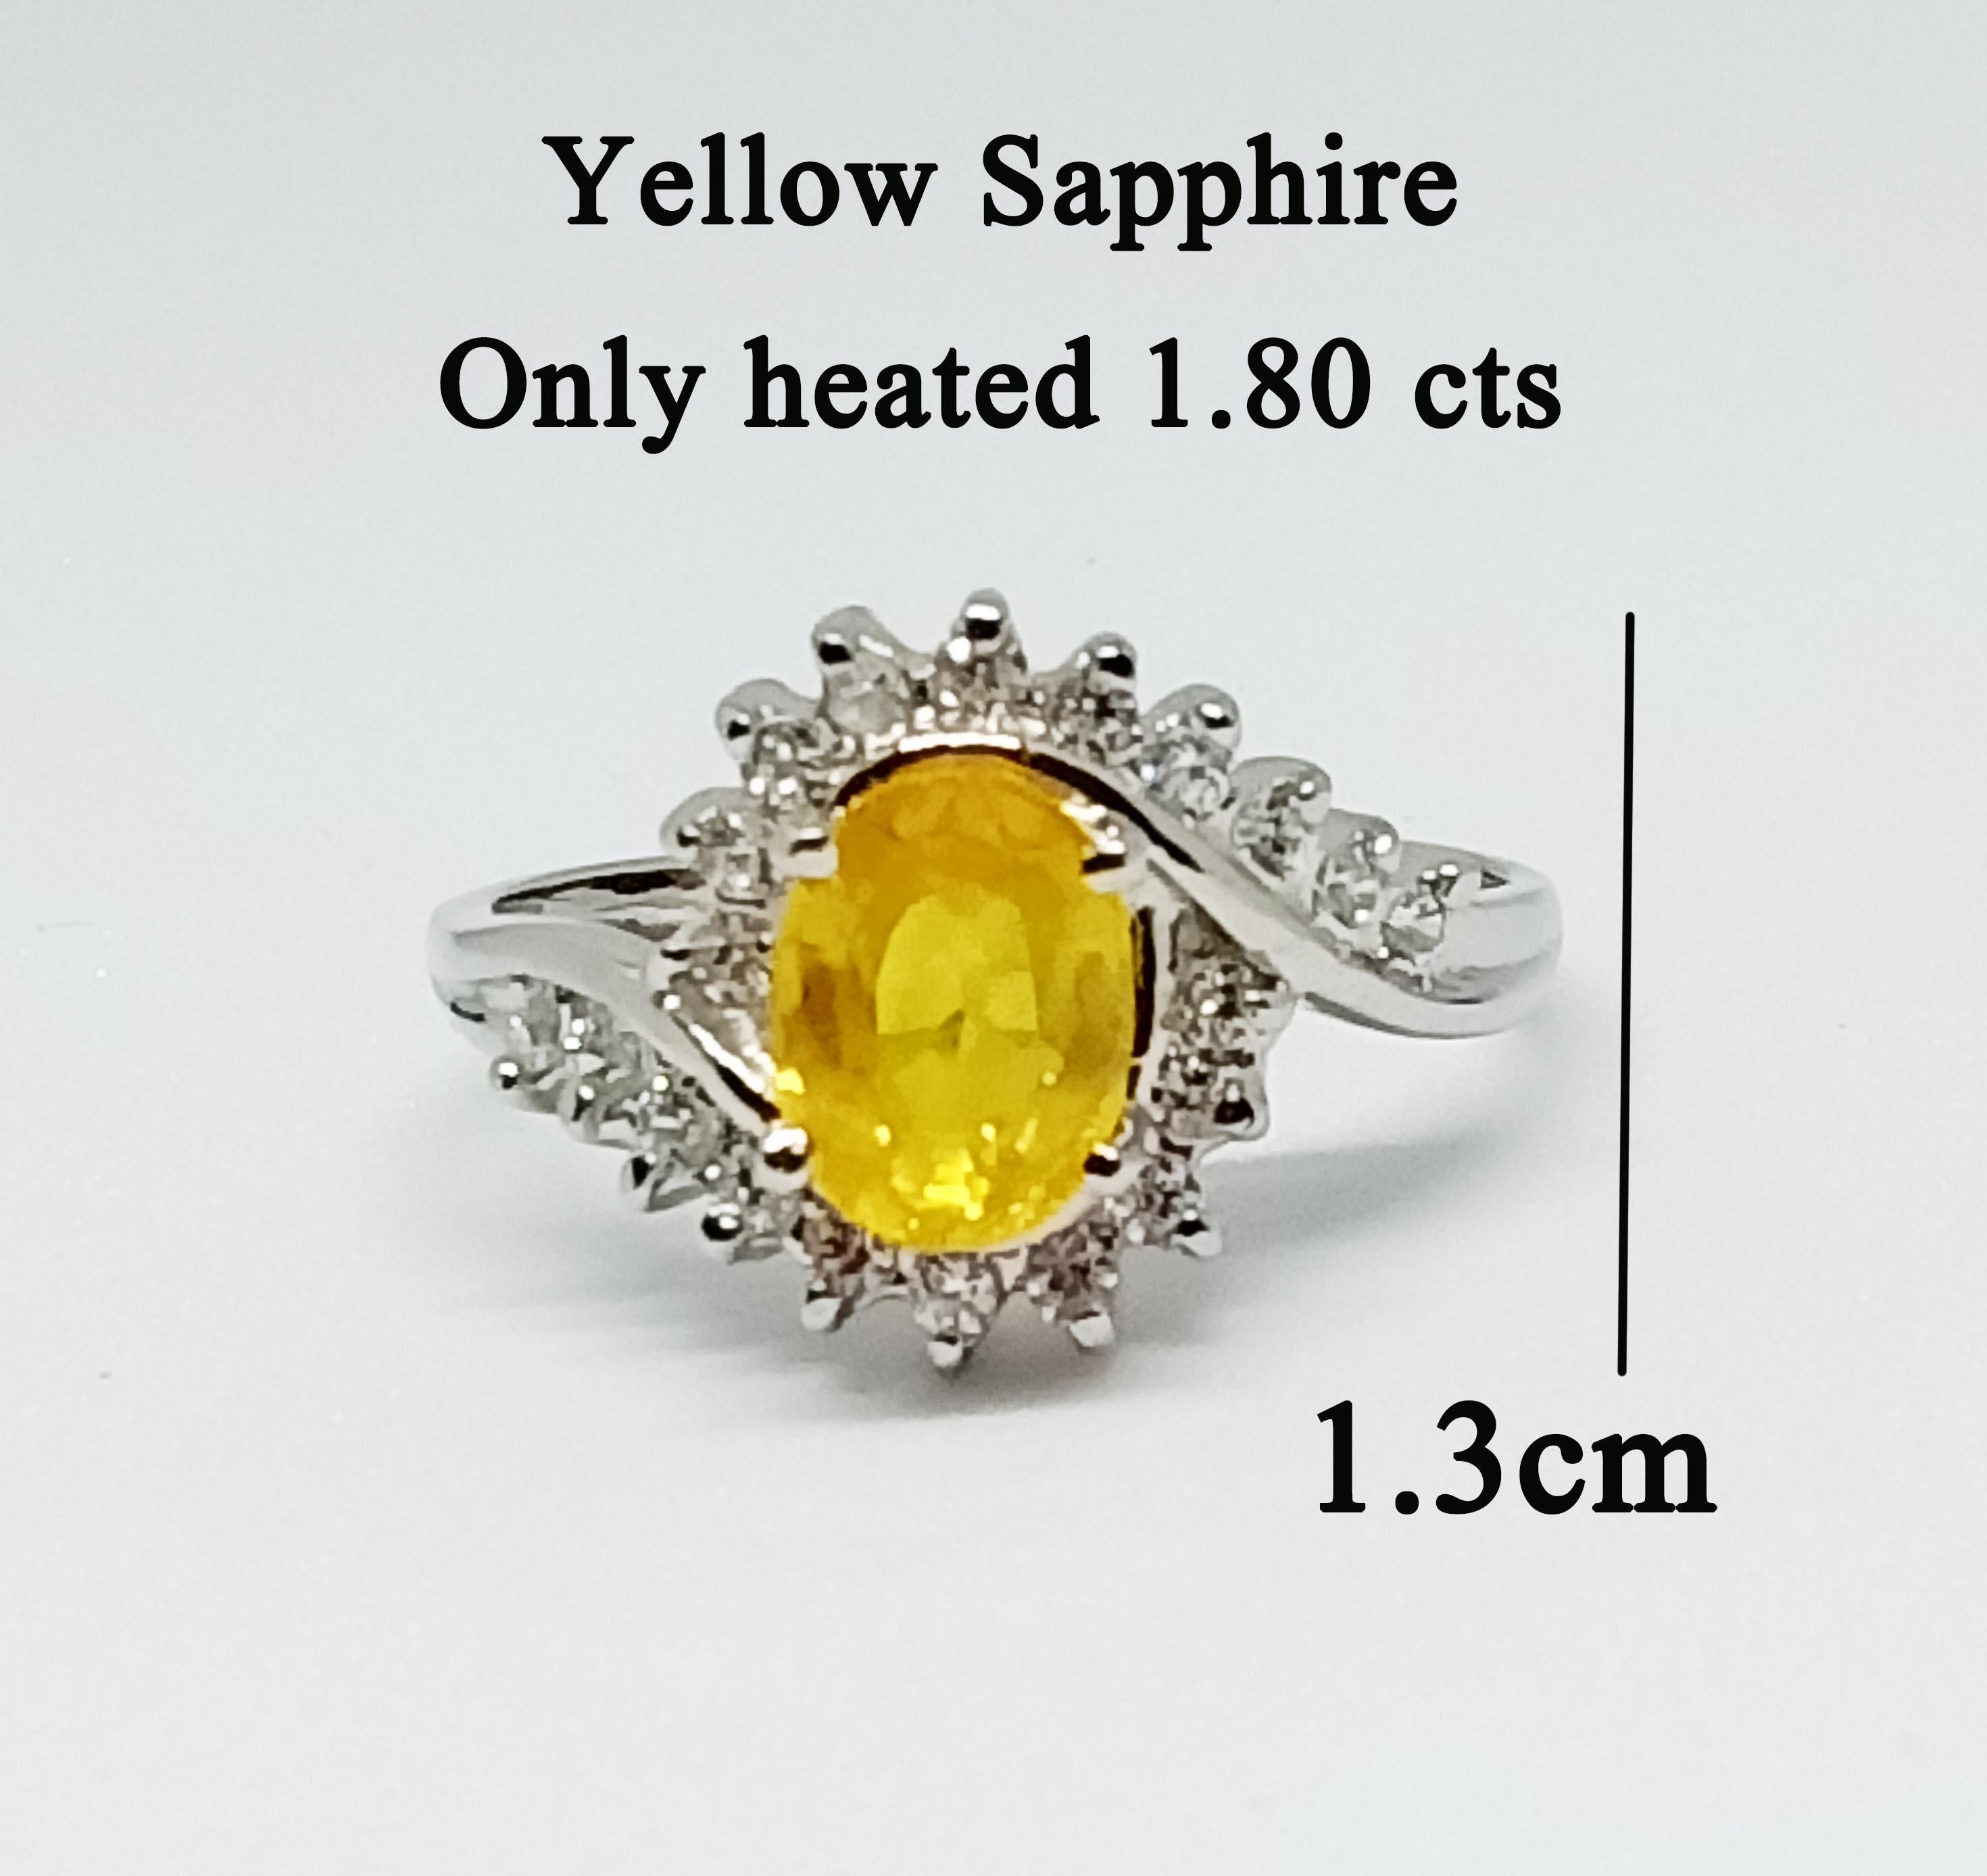 Yellow sapphire oval 1.80 cts  size 8x6 mm. Only heated 
White zircon round 1.5 mm. 18 pcs.
Over sterling Silver in 18K White gold Plated.
Metal Silver
